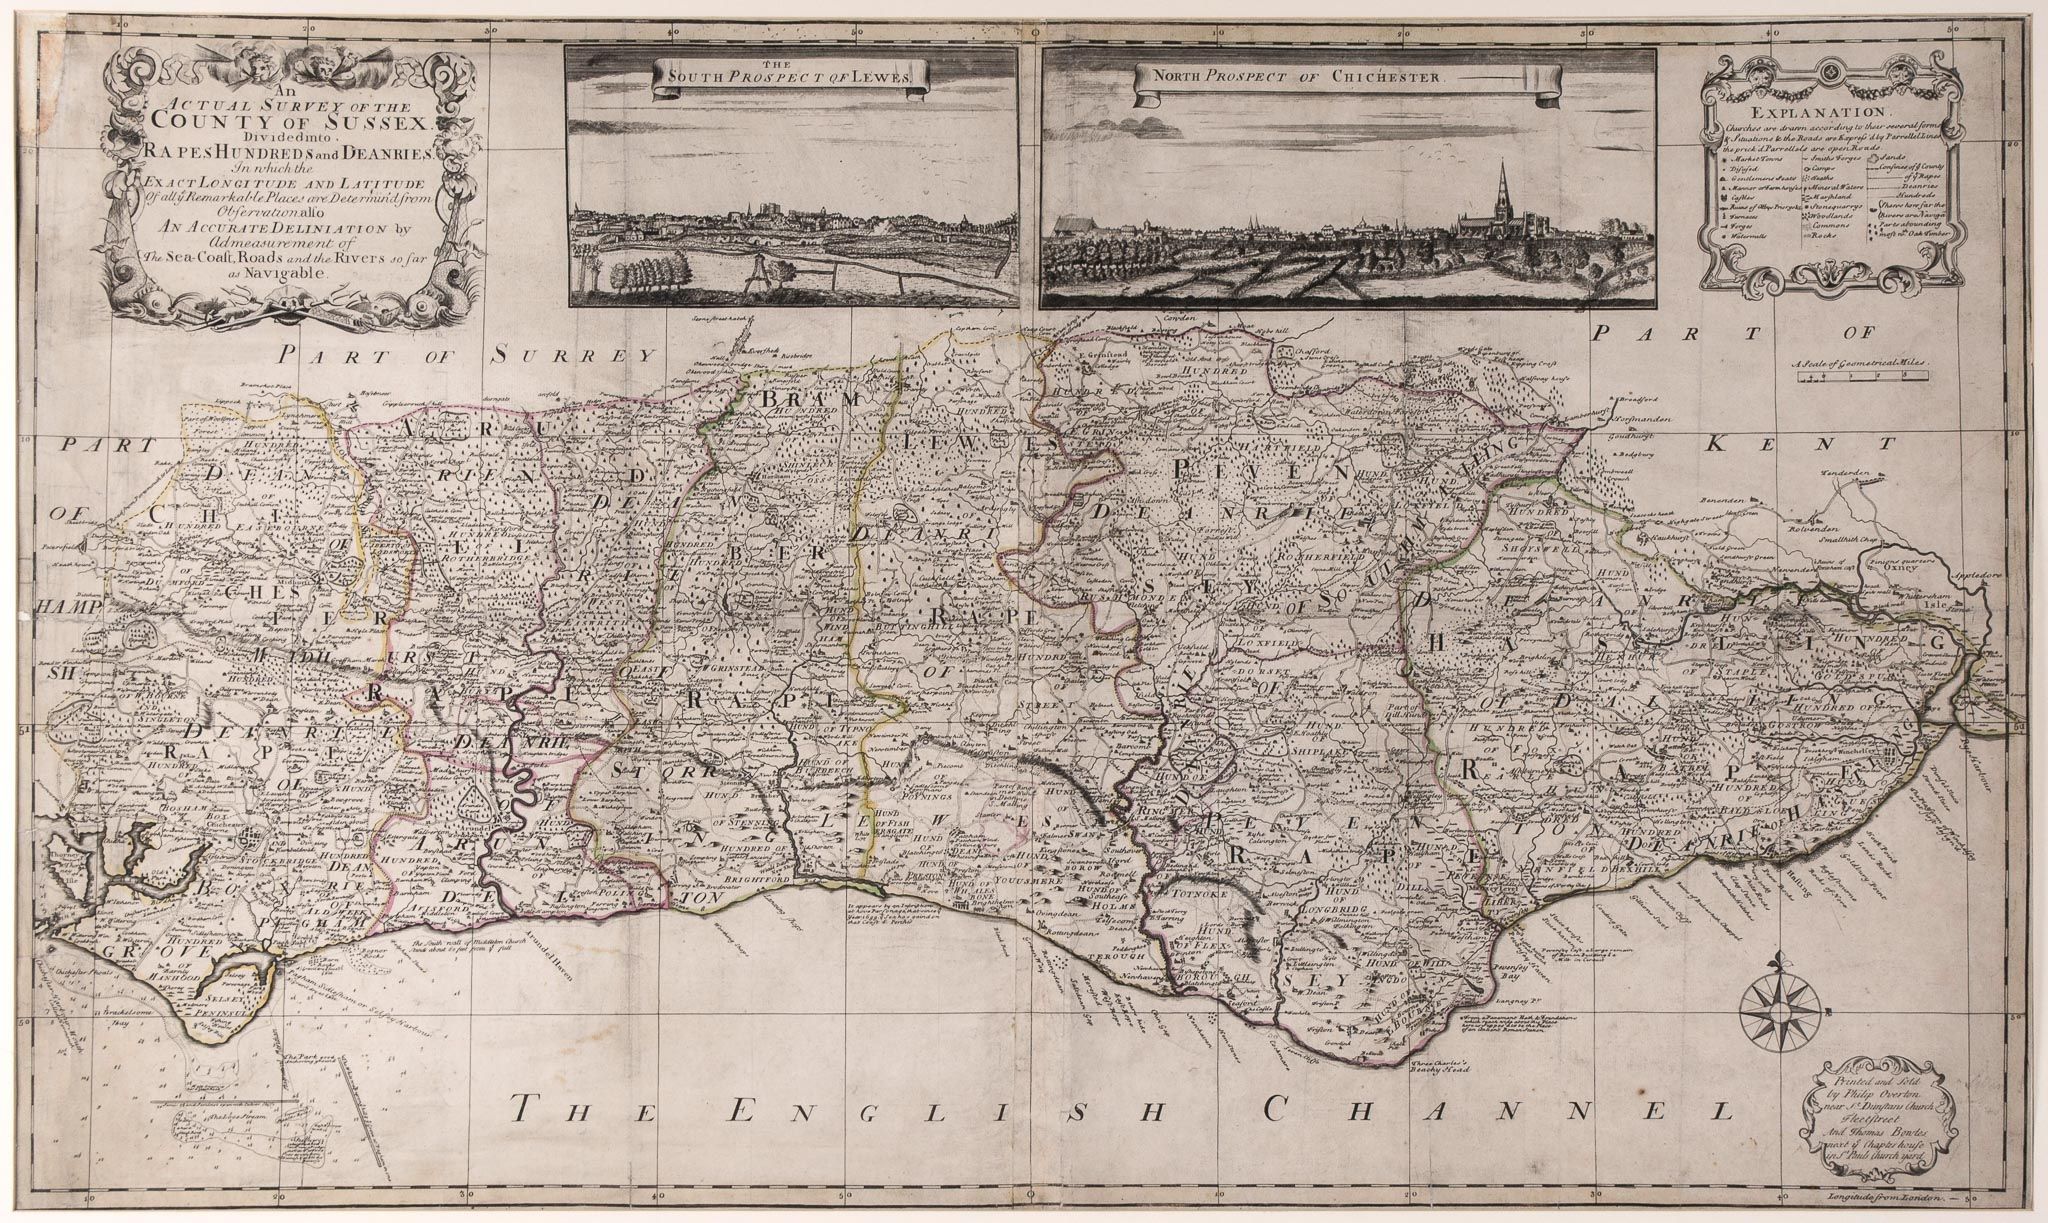 Sussex.- Overton (Phillip) - An Actual Survey of the County of Sussex, large county map with inset